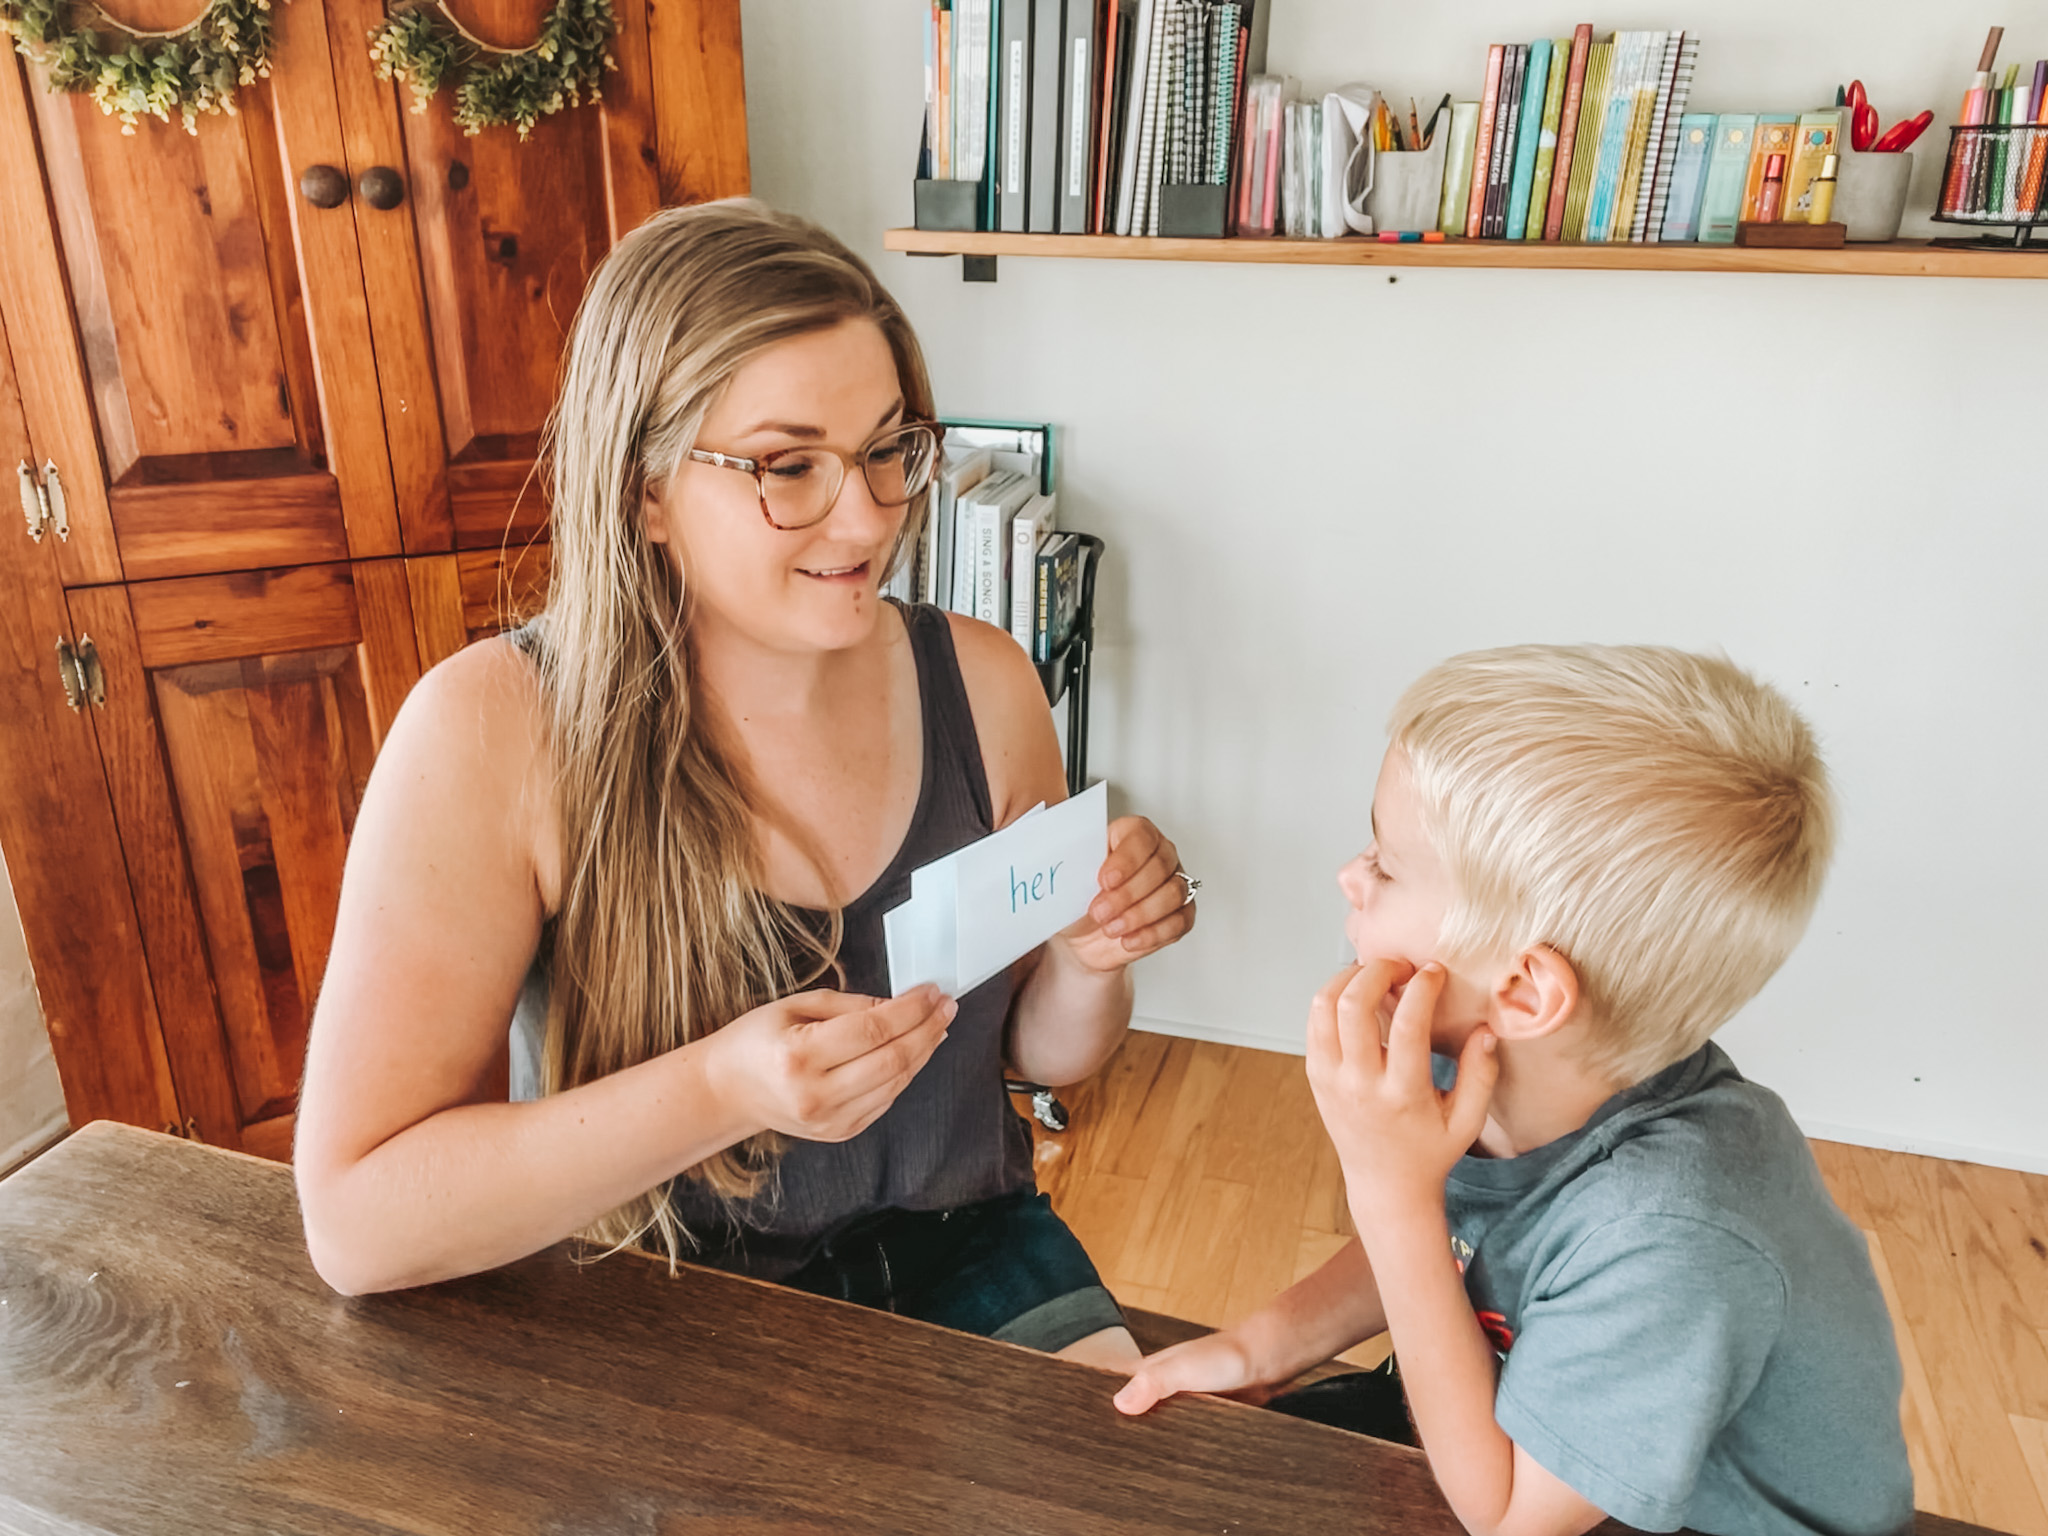 homeschool mom holding up flash cards with popcorn words written on them for her kindergarten son to learn